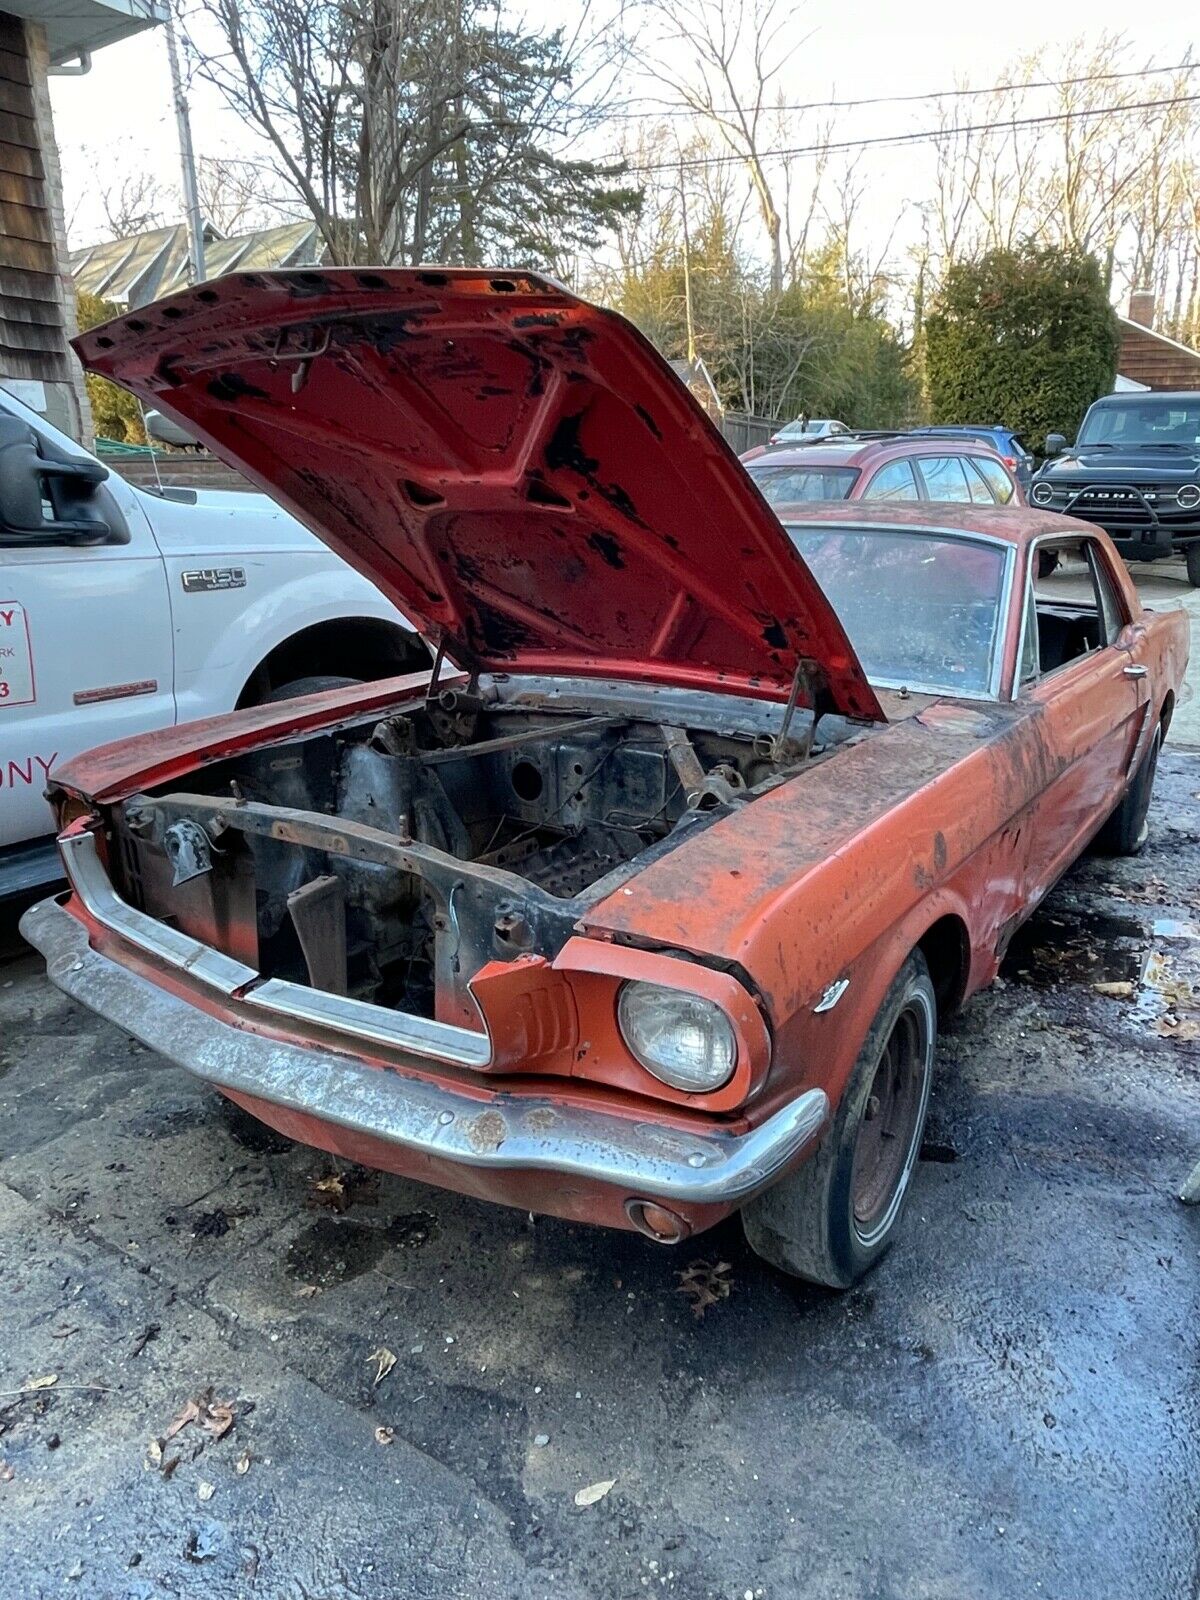 1965 Mustang Sitting for Years Looks Bad at First, Not That Bad at ...